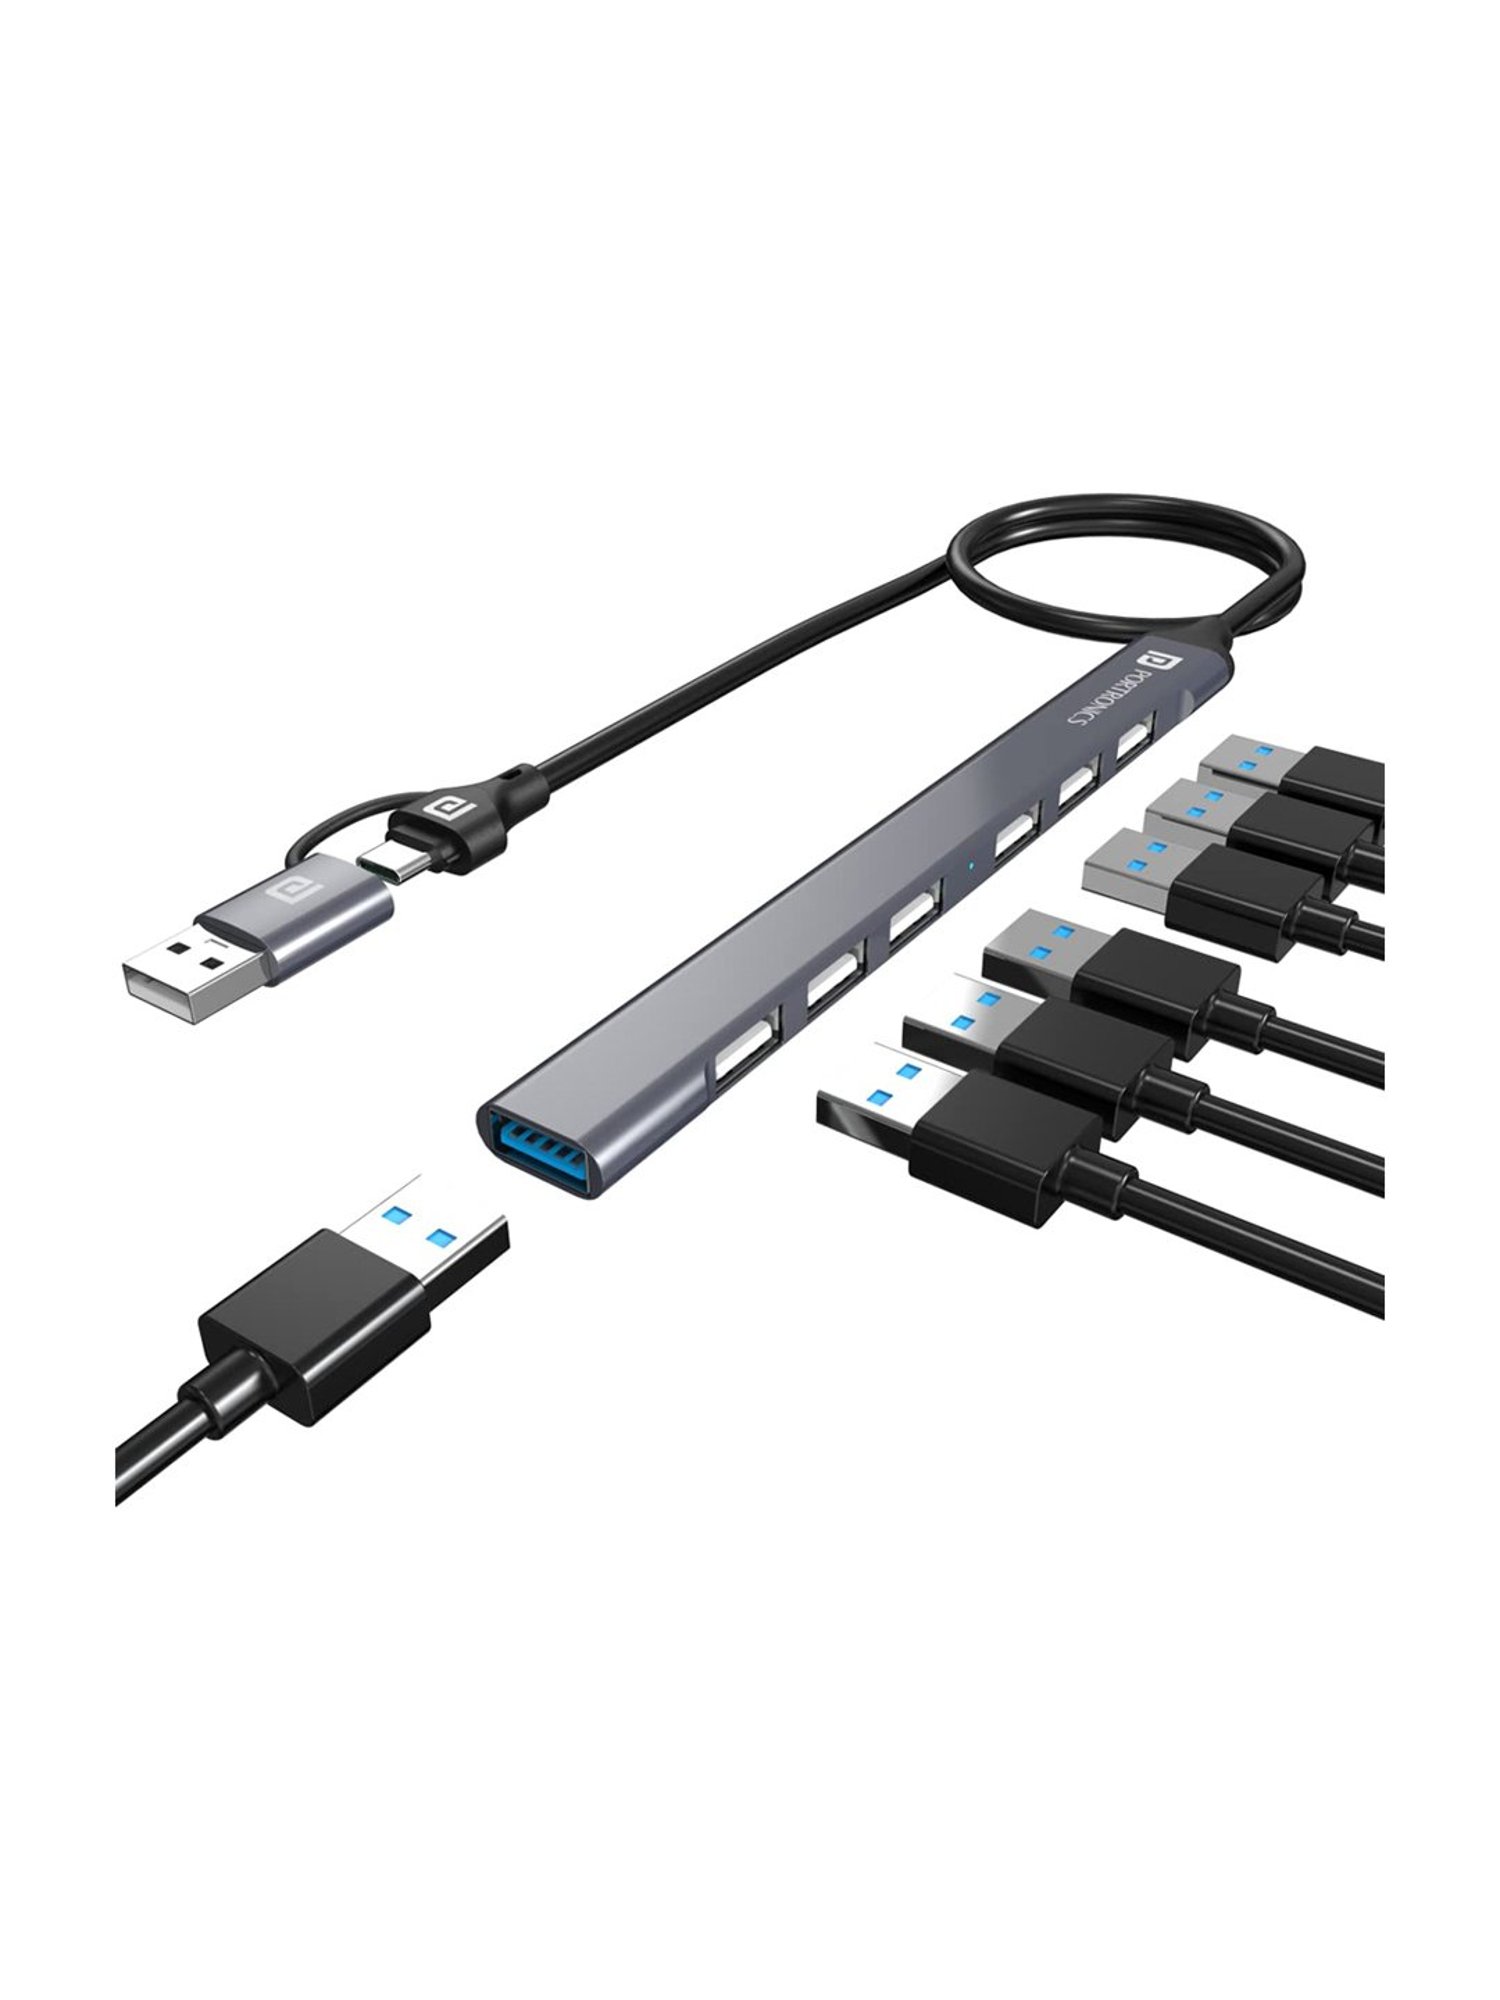 7-Port Usb 3.0 Hub with LED Lamp Switch Power Adapter 7 Poort Multiple  Expander Usb